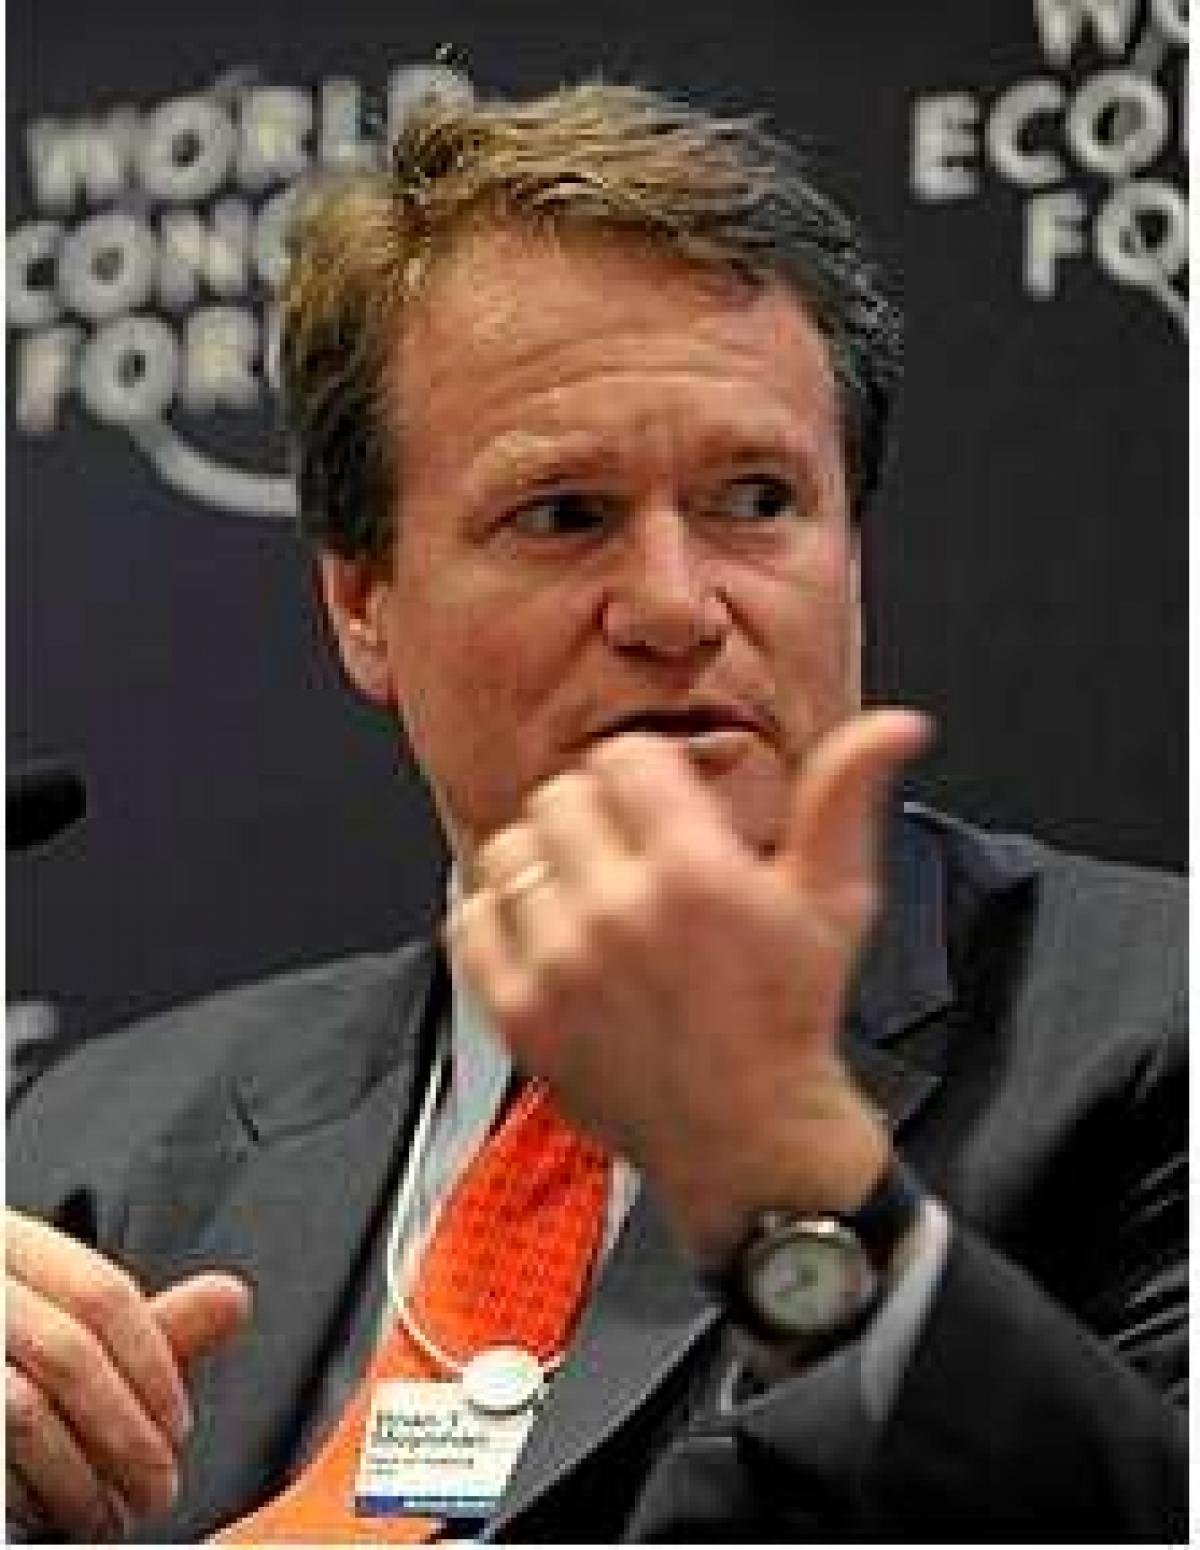 Corporate Governance: The Chairman/CEO Thing at Bank of America